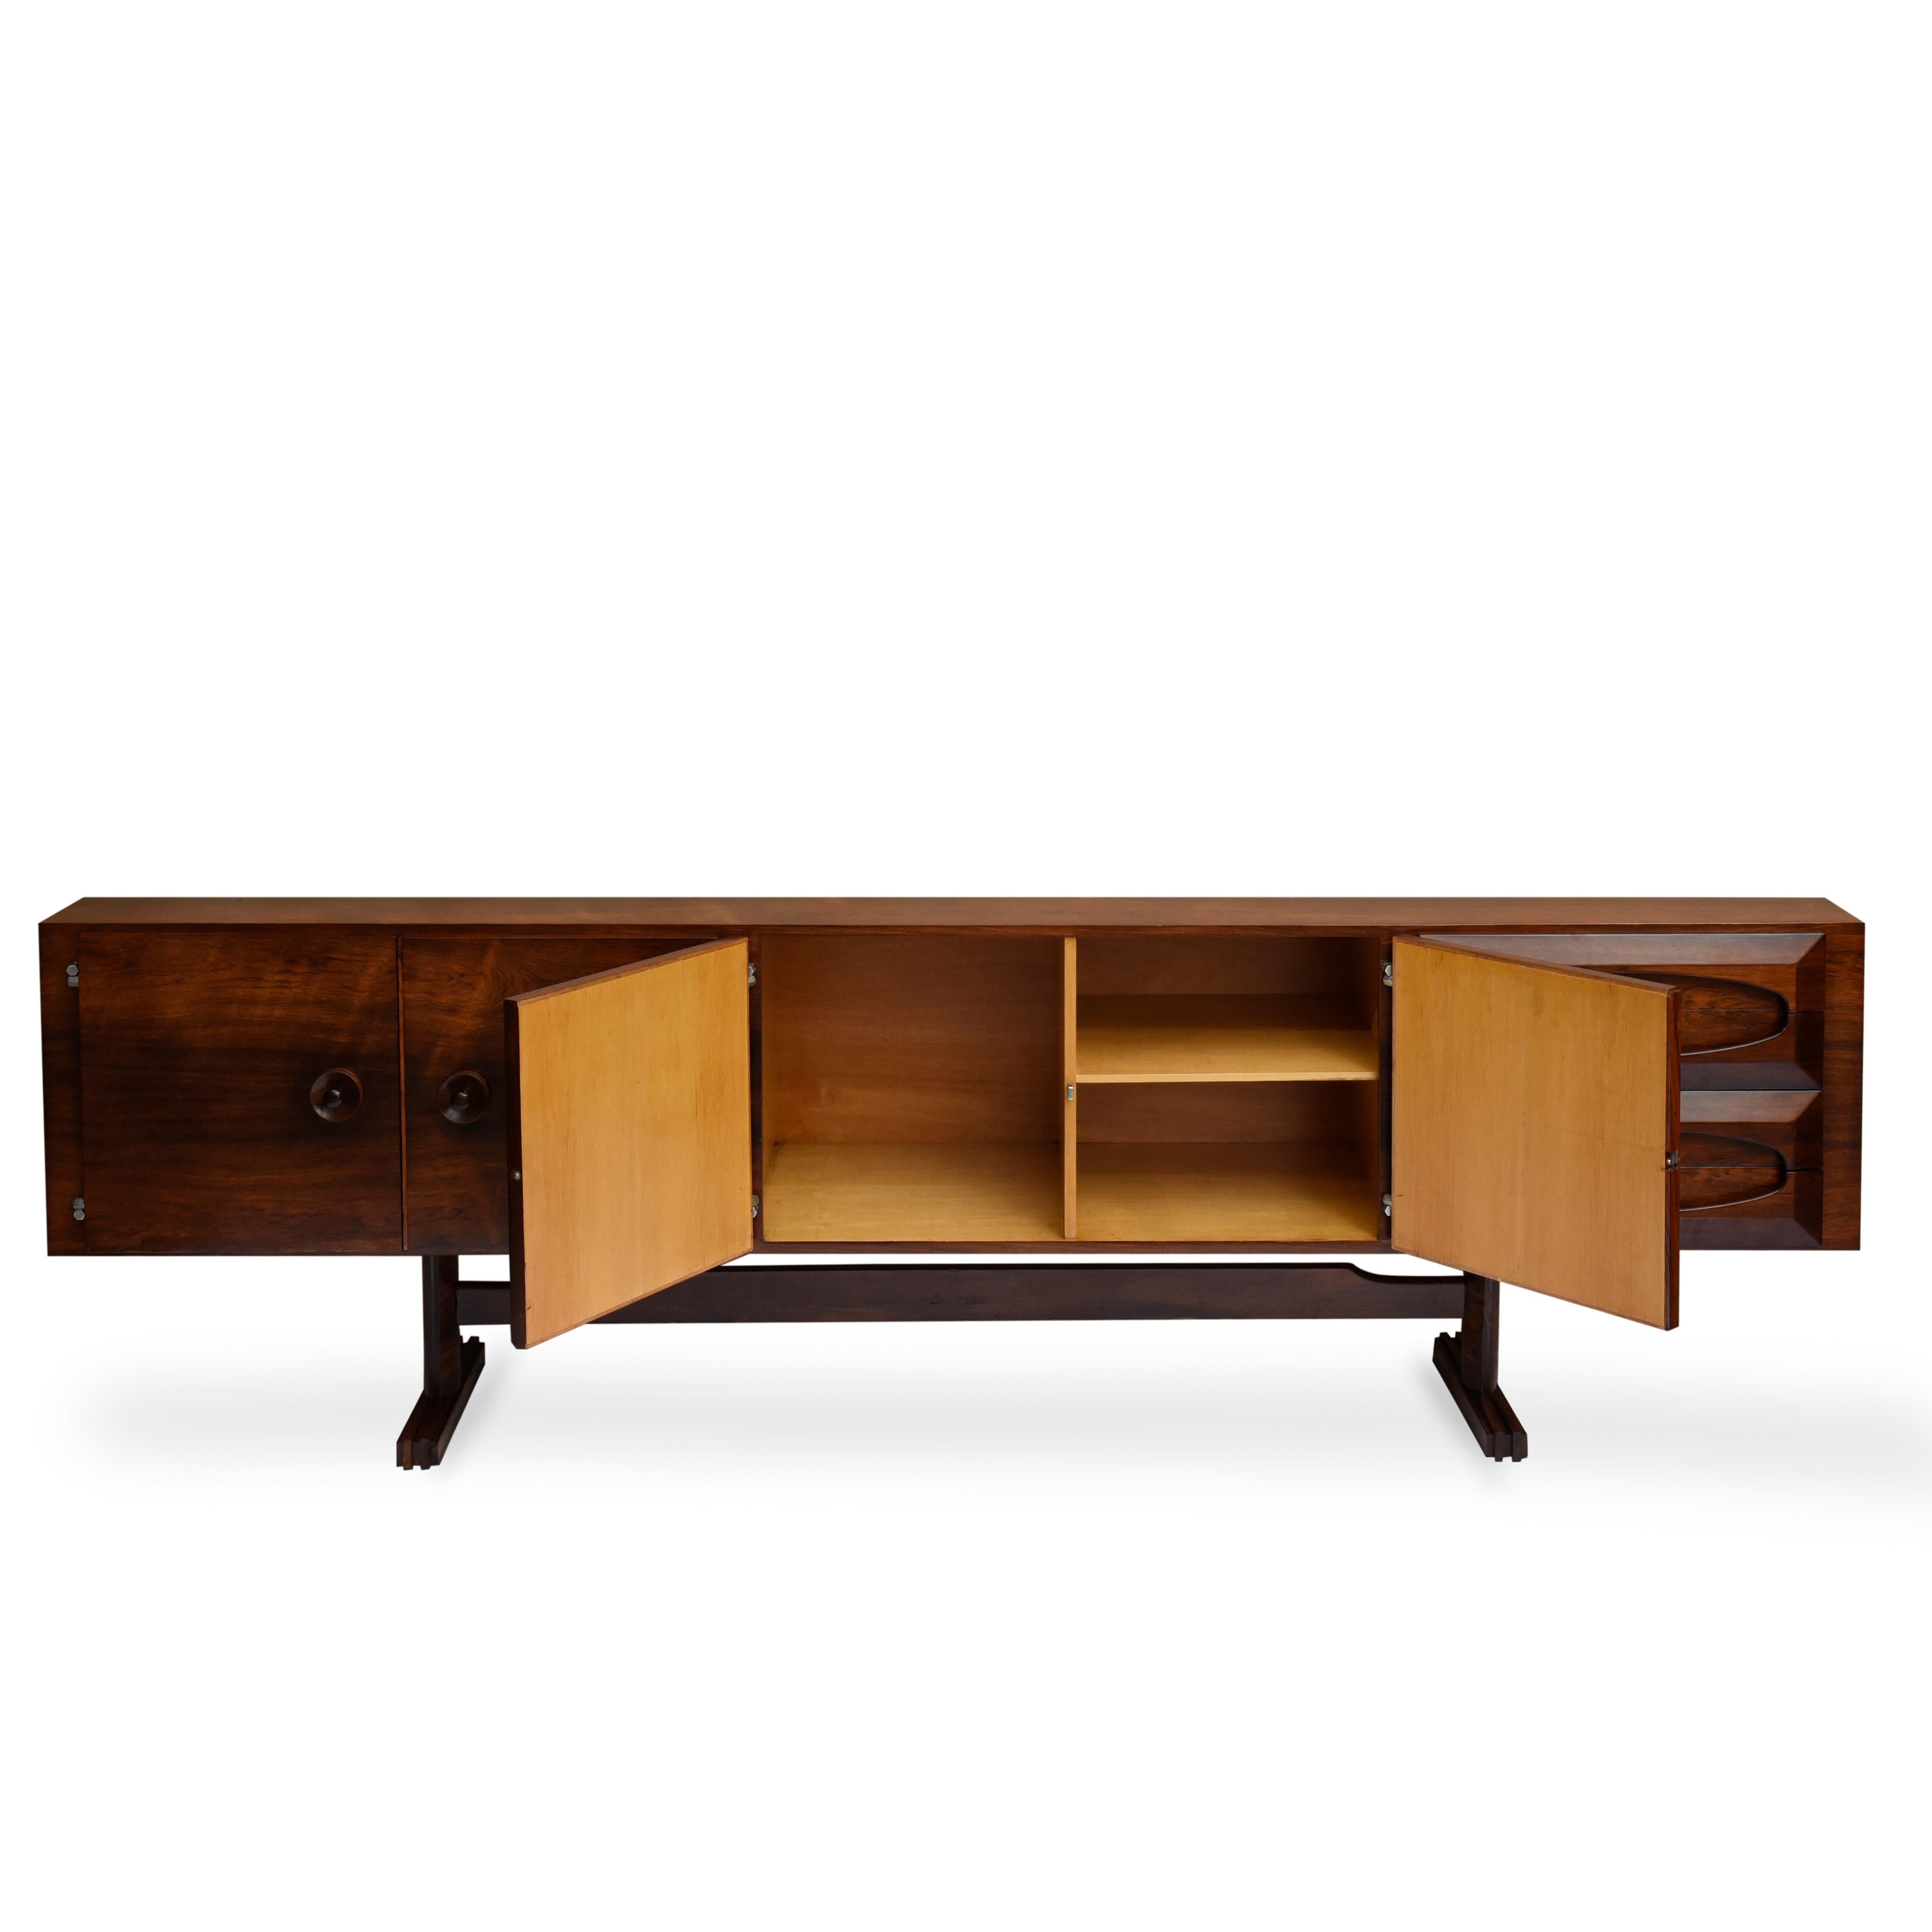 Novo Rumo midcentury Brazilian buffet with brazilian wood structure, 1960s

Beautiful buffet with four doors and four drawers.
There are 6 compartments behind the doors with ample storage. The detail of the drawer knobs is the highlight of the